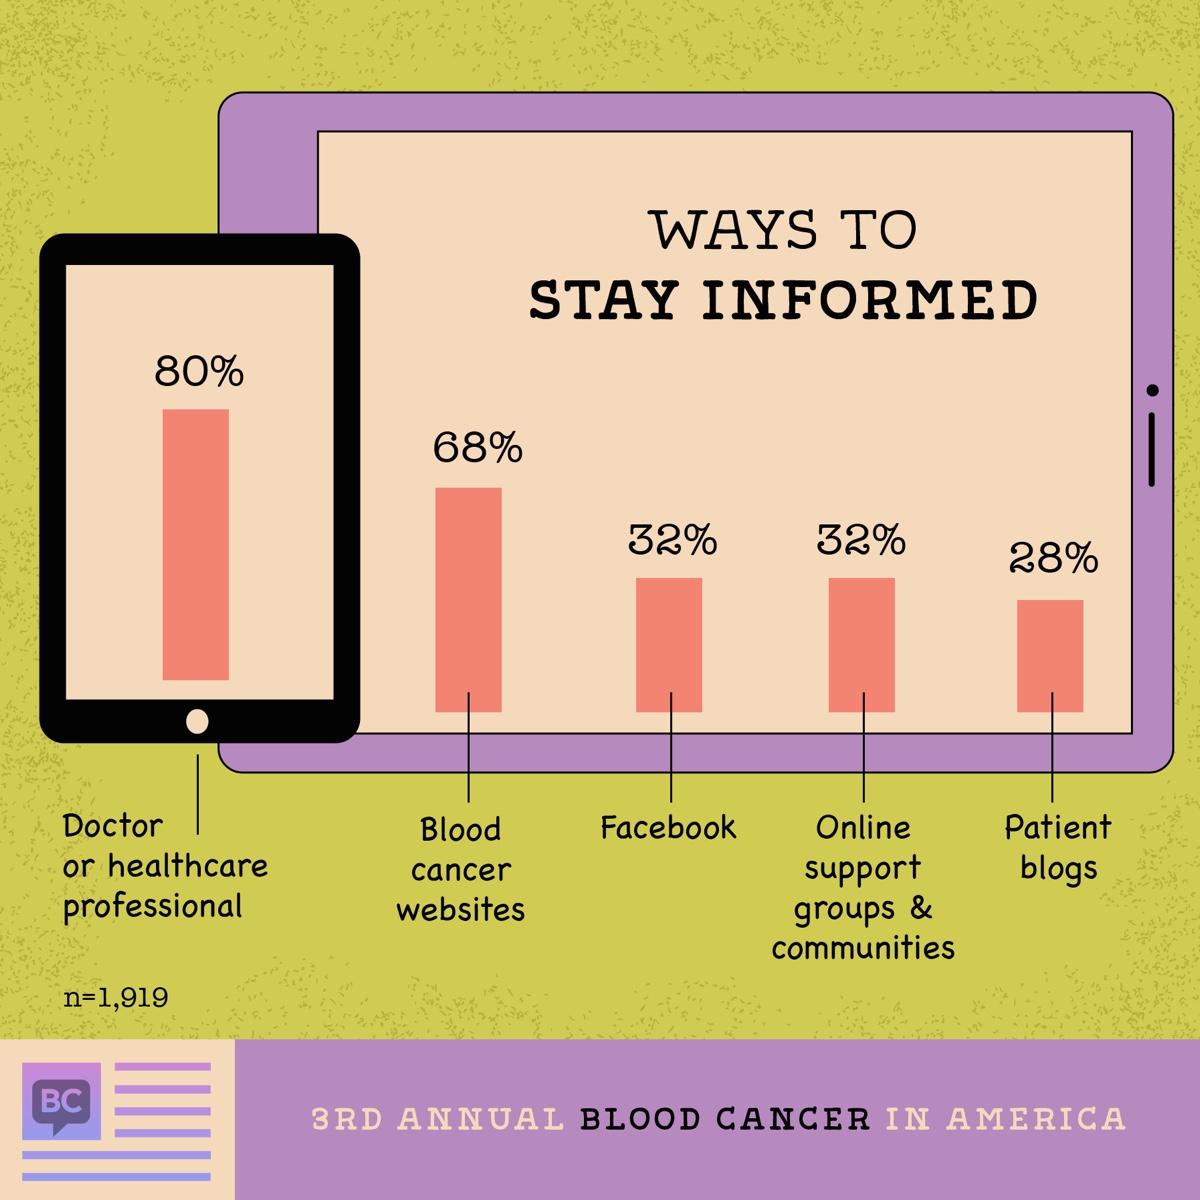 Ways people with blood cancer stay informed: Doctor of healthcare professional (80%), blood cancer-specific websites (68%), Facebook (32%), online support groups and communities (32%), patient blogs (28%)